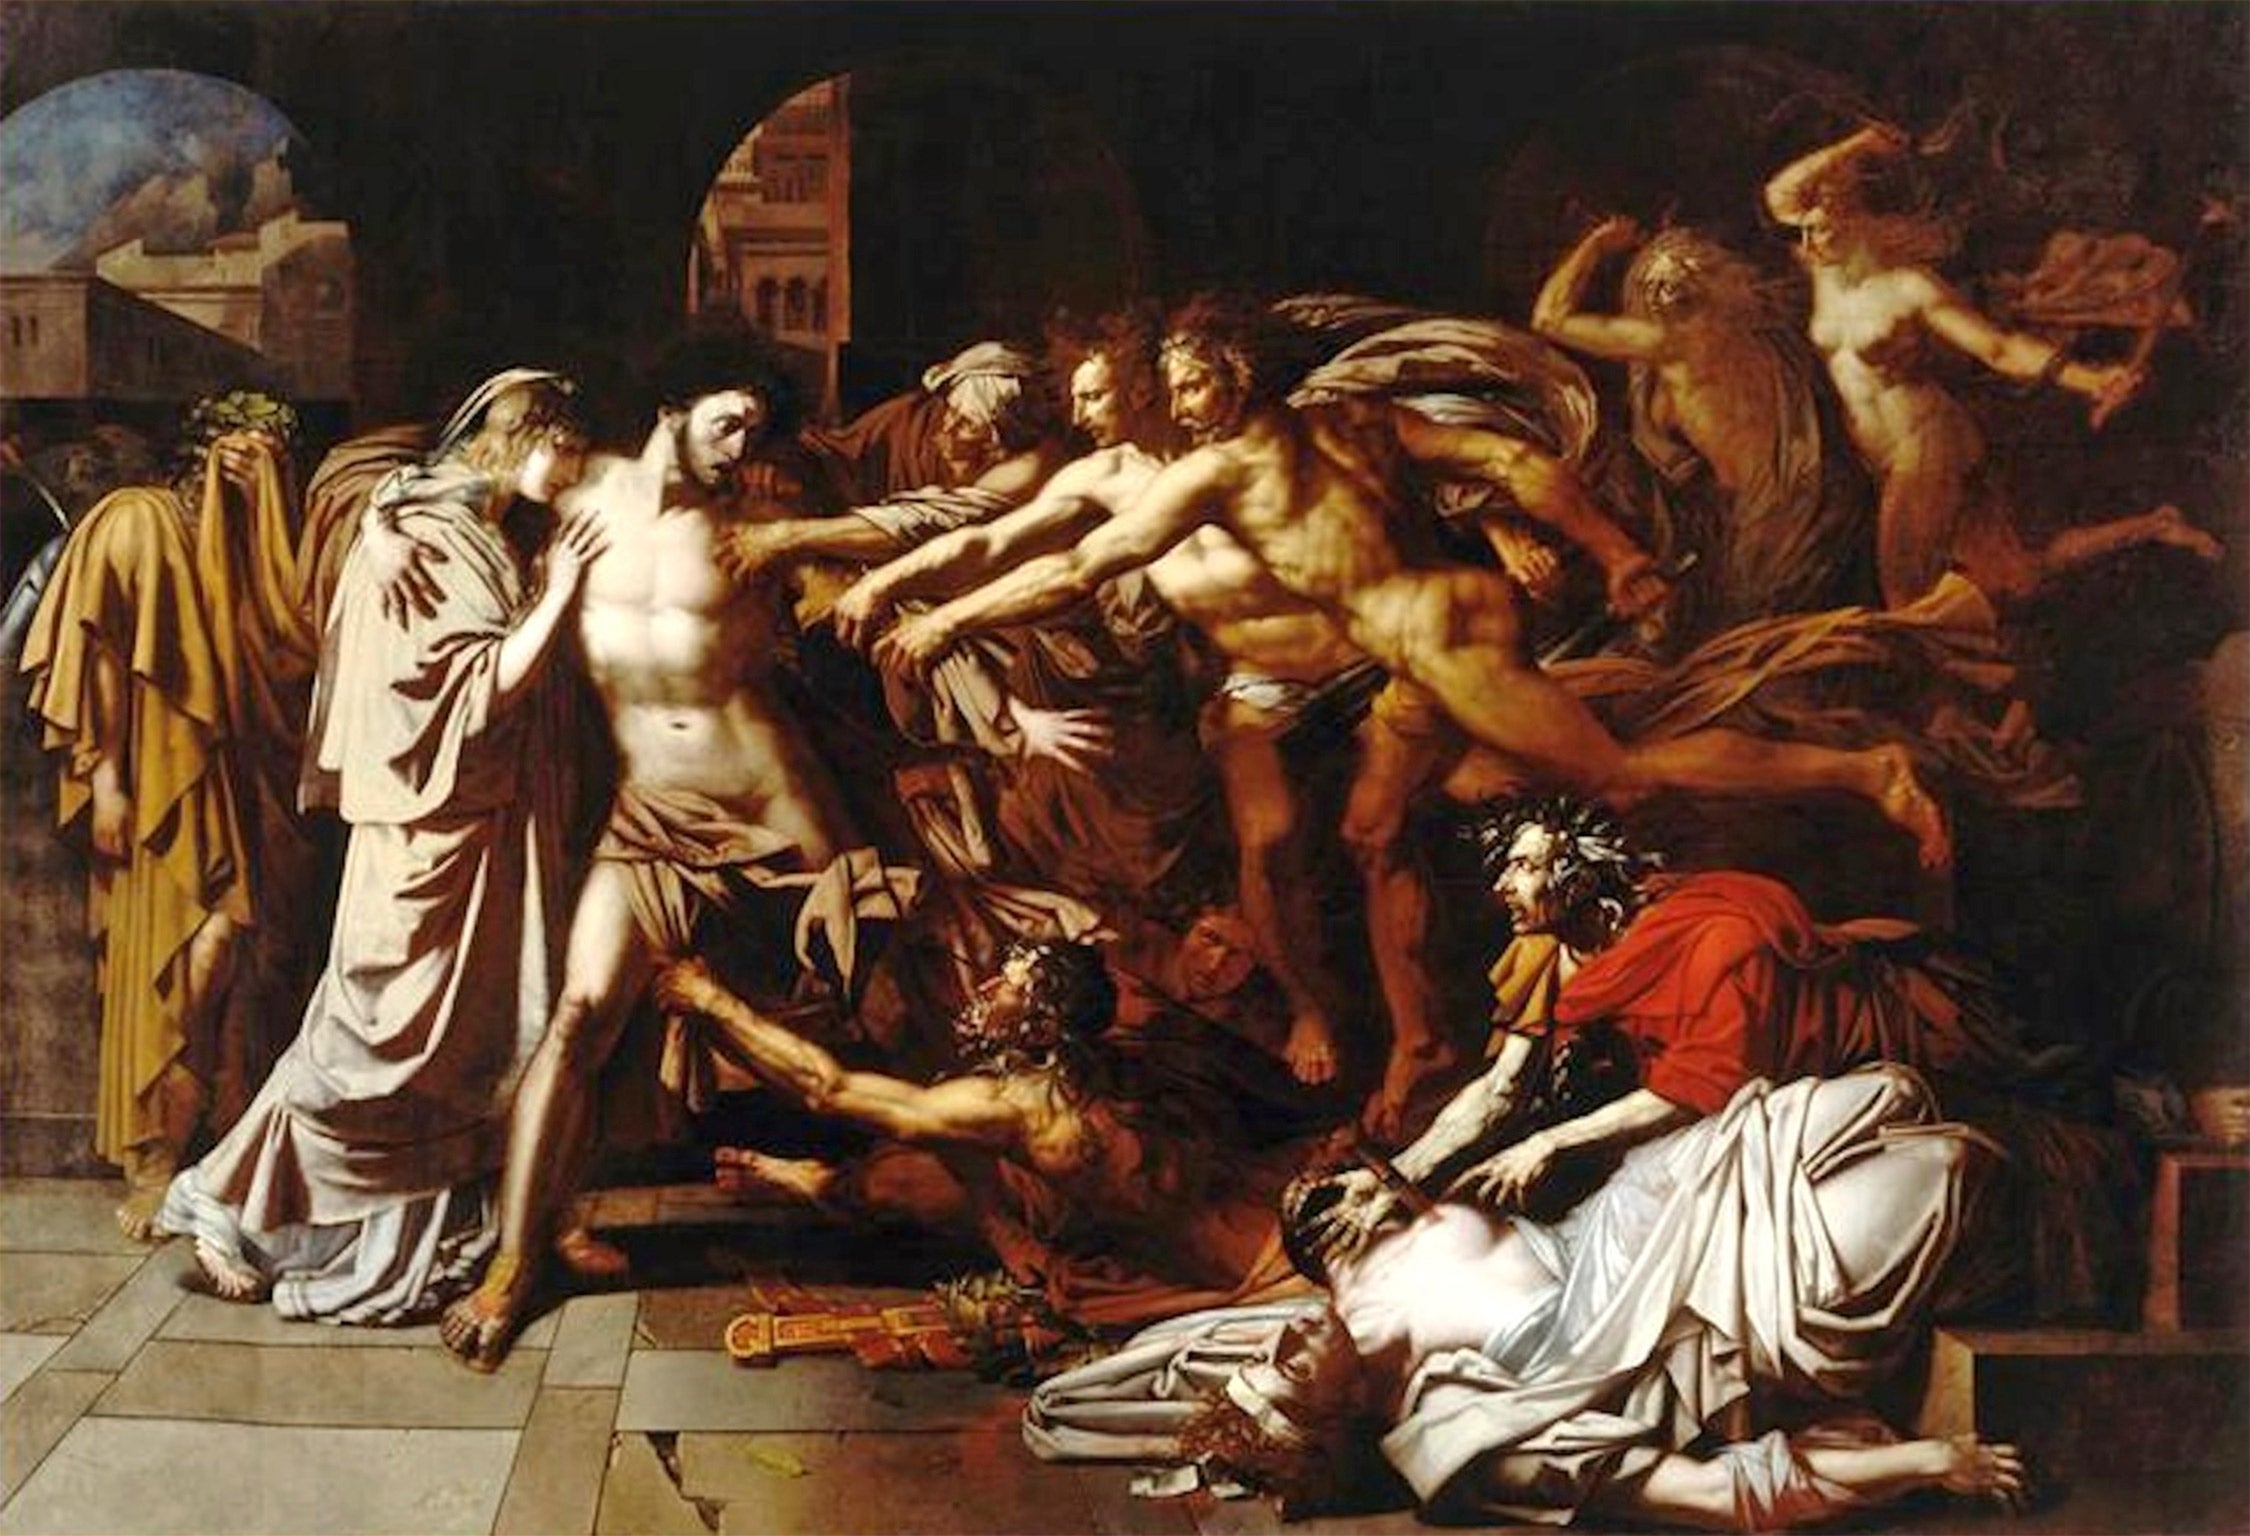 Hennequin’s painting of Orestes tormented by the Furies, which shows him being embraced by his sister Electra after killing their mother in a mad plot